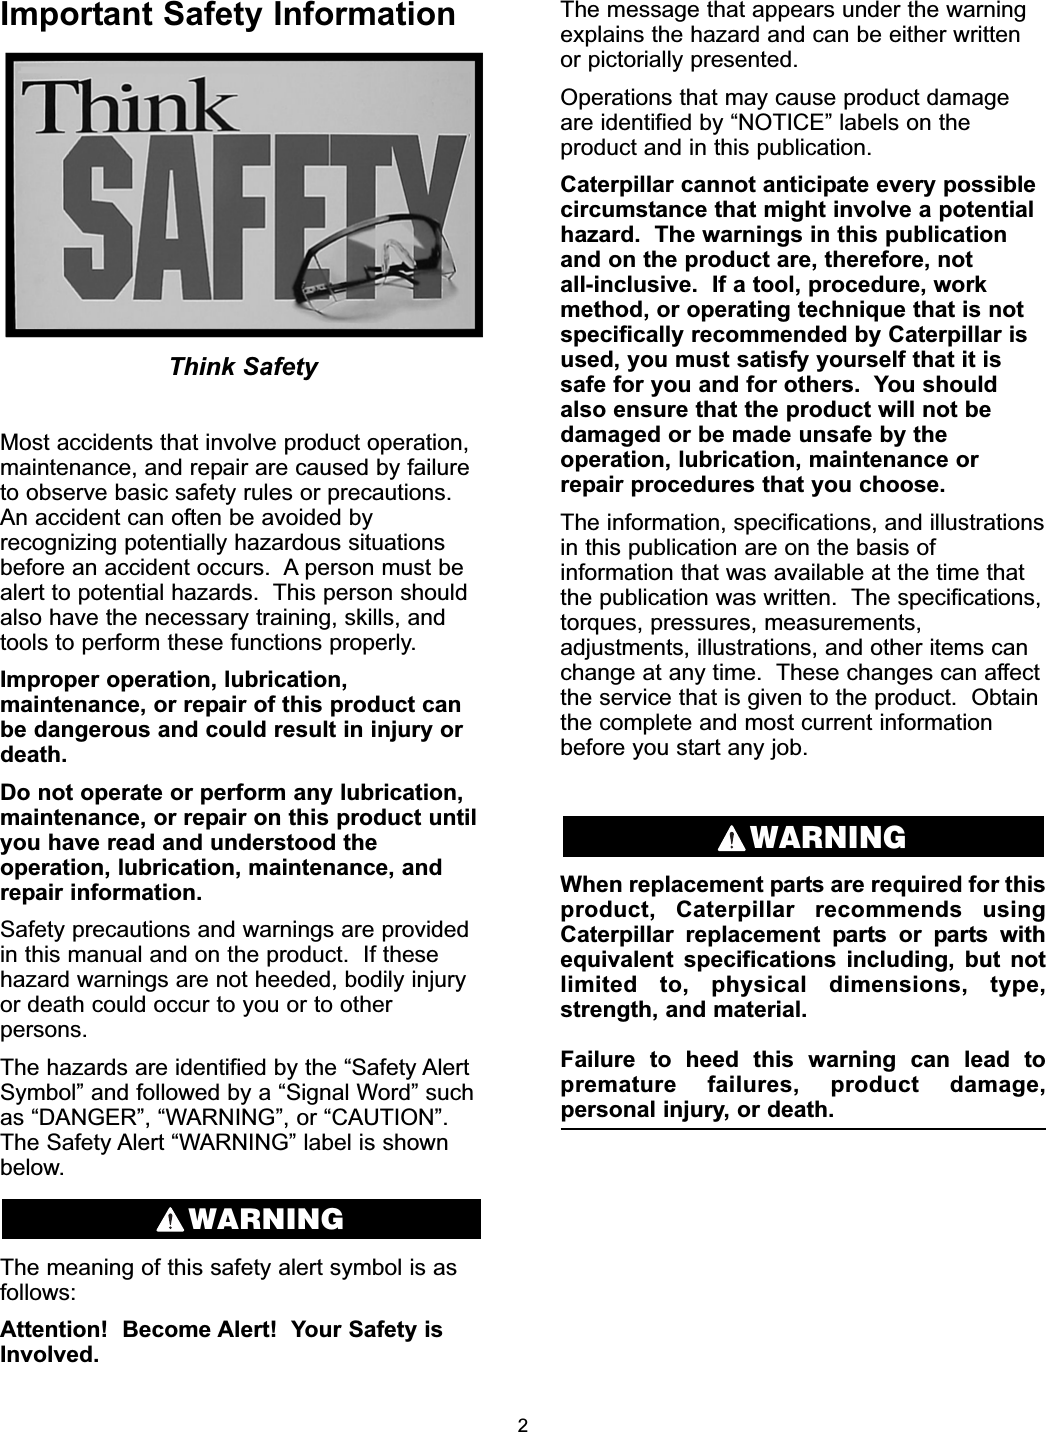 Important Safety InformationThink SafetyMost accidents that involve product operation,maintenance, and repair are caused by failureto observe basic safety rules or precautions.An accident can often be avoided byrecognizing potentially hazardous situationsbefore an accident occurs.  A person must bealert to potential hazards.  This person shouldalso have the necessary training, skills, andtools to perform these functions properly.Improper operation, lubrication,maintenance, or repair of this product canbe dangerous and could result in injury ordeath.Do not operate or perform any lubrication,maintenance, or repair on this product untilyou have read and understood theoperation, lubrication, maintenance, andrepair information.Safety precautions and warnings are providedin this manual and on the product.  If thesehazard warnings are not heeded, bodily injuryor death could occur to you or to otherpersons.The hazards are identified by the “Safety AlertSymbol” and followed by a “Signal Word” suchas “DANGER”, “WARNING”, or “CAUTION”.The Safety Alert “WARNING” label is shownbelow.The meaning of this safety alert symbol is asfollows:Attention!  Become Alert!  Your Safety isInvolved.The message that appears under the warningexplains the hazard and can be either writtenor pictorially presented.Operations that may cause product damageare identified by “NOTICE” labels on theproduct and in this publication.Caterpillar cannot anticipate every possiblecircumstance that might involve a potentialhazard.  The warnings in this publicationand on the product are, therefore, not all-inclusive.  If a tool, procedure, workmethod, or operating technique that is notspecifically recommended by Caterpillar isused, you must satisfy yourself that it issafe for you and for others.  You shouldalso ensure that the product will not bedamaged or be made unsafe by theoperation, lubrication, maintenance orrepair procedures that you choose.The information, specifications, and illustrationsin this publication are on the basis ofinformation that was available at the time thatthe publication was written.  The specifications,torques, pressures, measurements,adjustments, illustrations, and other items canchange at any time.  These changes can affectthe service that is given to the product.  Obtainthe complete and most current informationbefore you start any job.When replacement parts are required for thisproduct, Caterpillar recommends usingCaterpillar replacement parts or parts withequivalent specifications including, but notlimited to, physical dimensions, type,strength, and material.Failure to heed this warning can lead topremature failures, product damage,personal injury, or death.WARNINGWARNING2